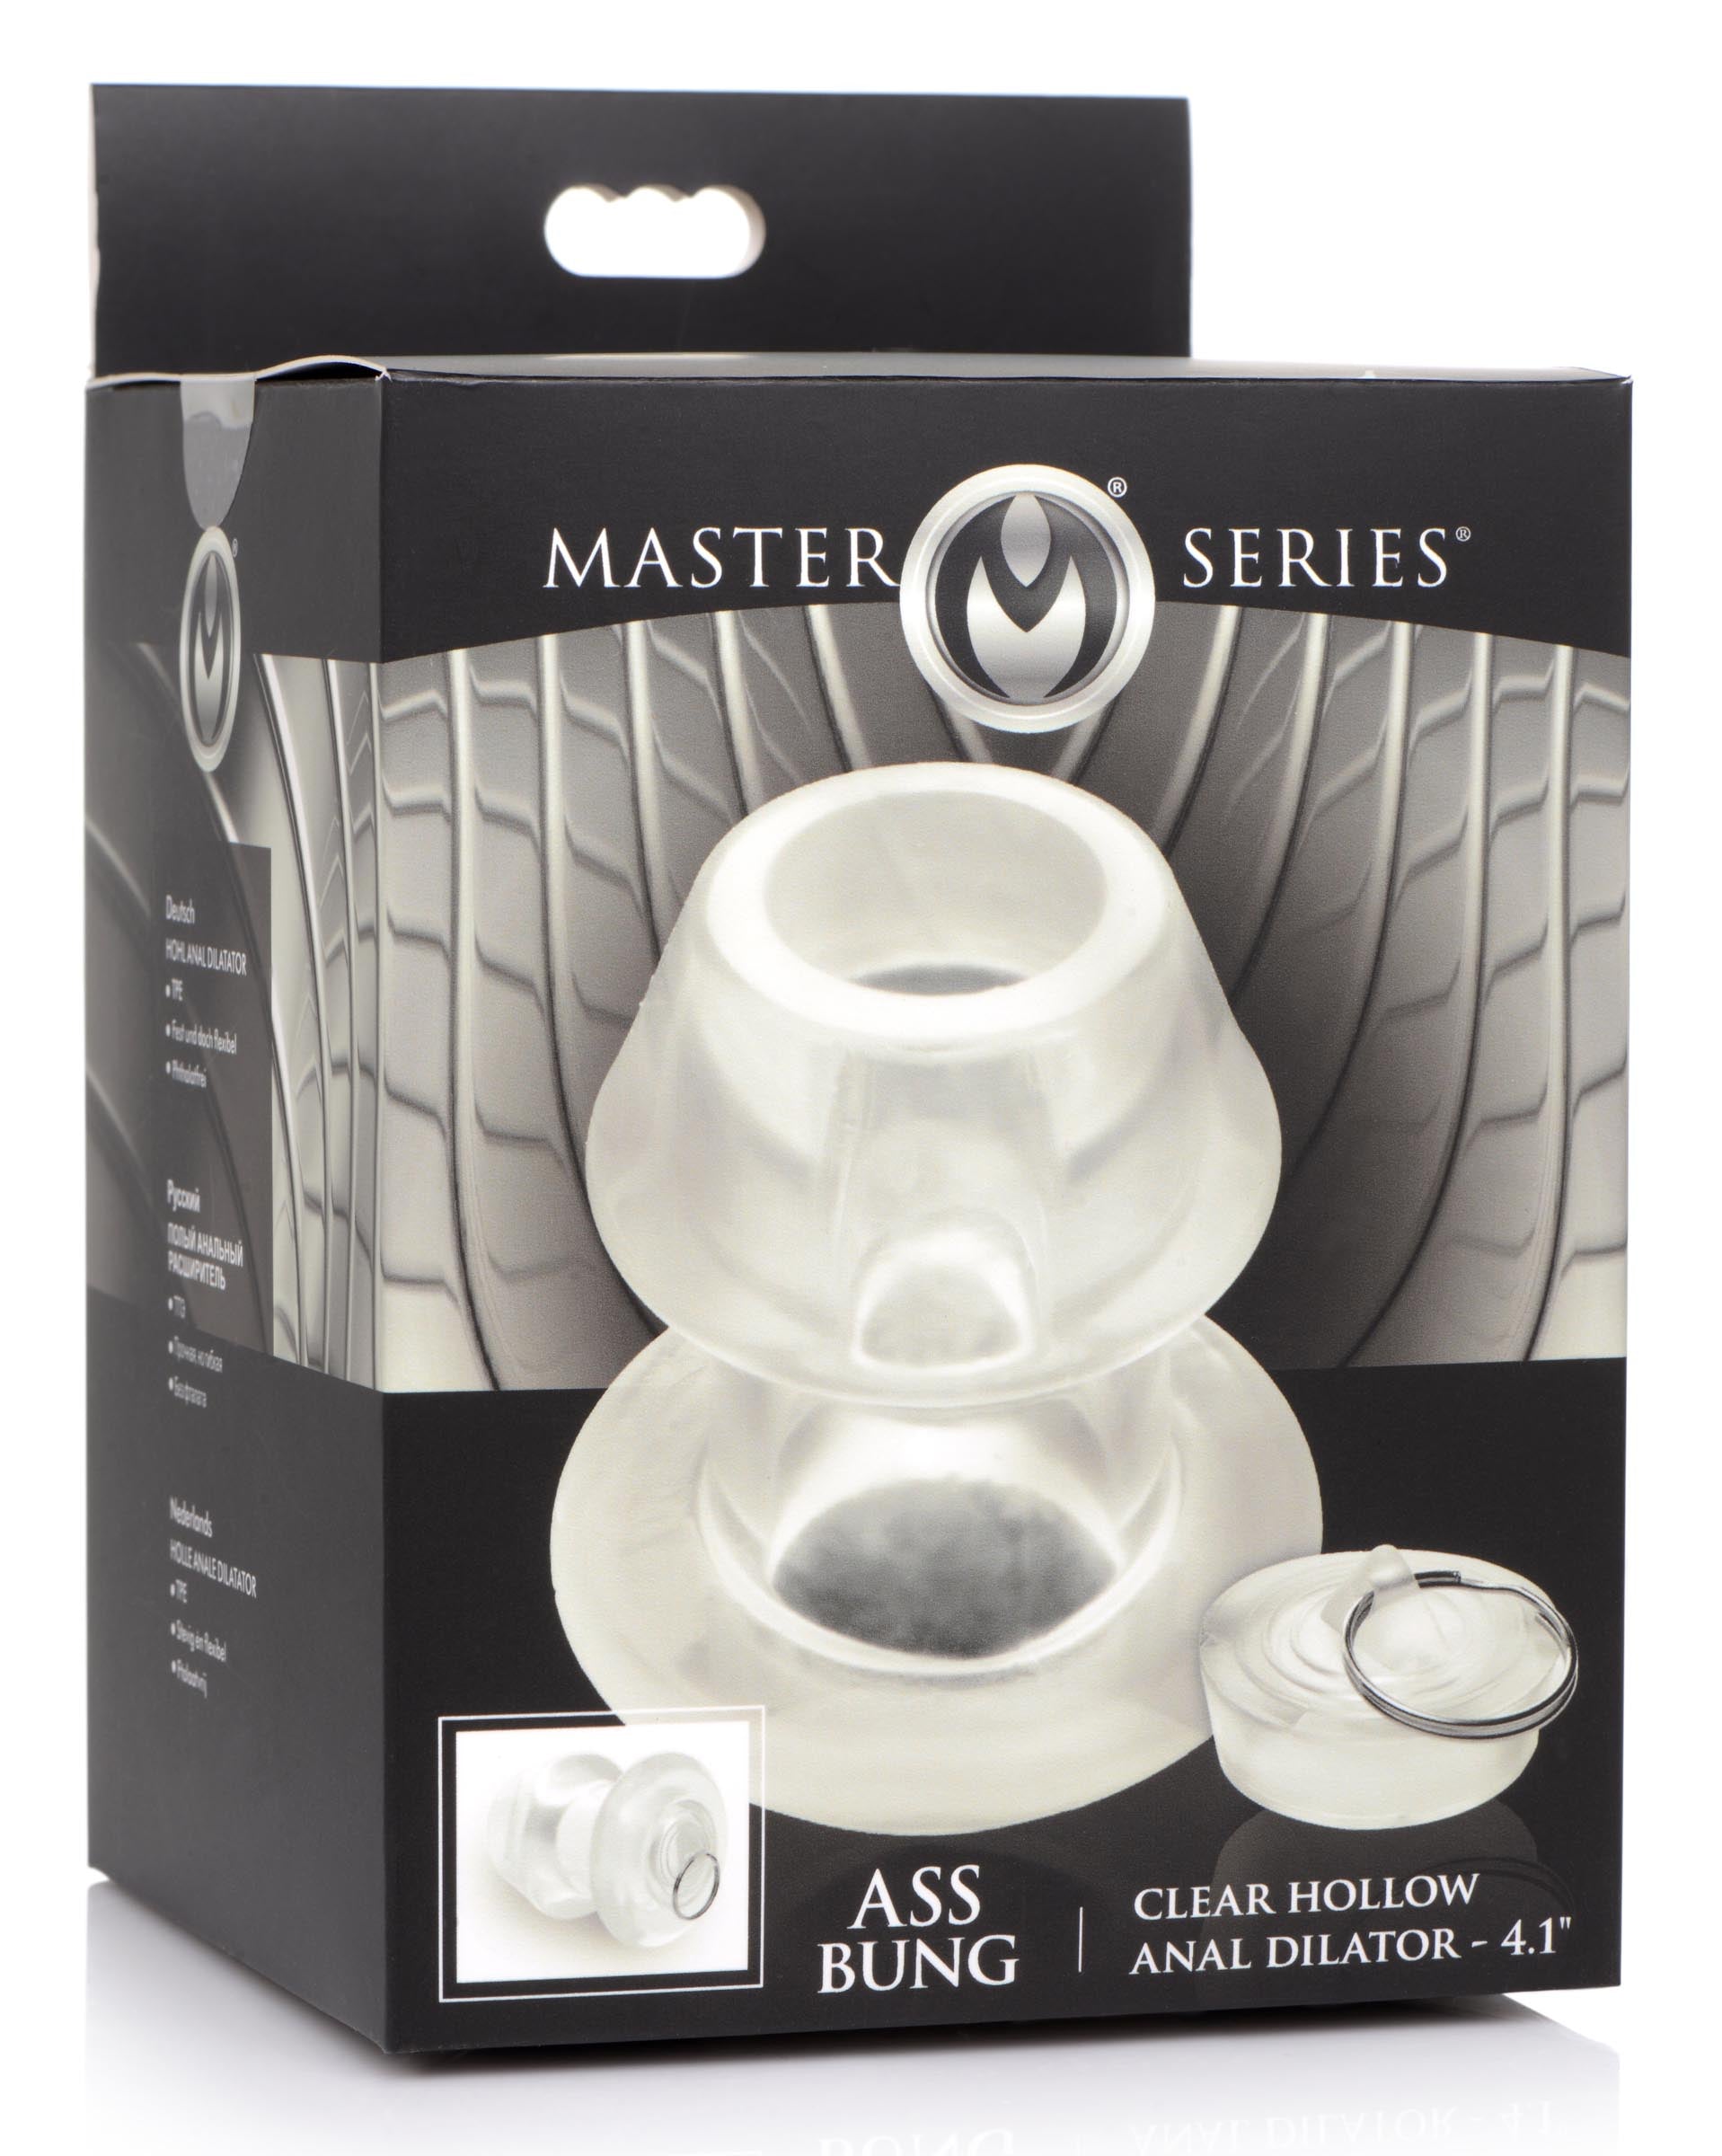 Ass Bung Clear Hollow Anal Dilator with Plug